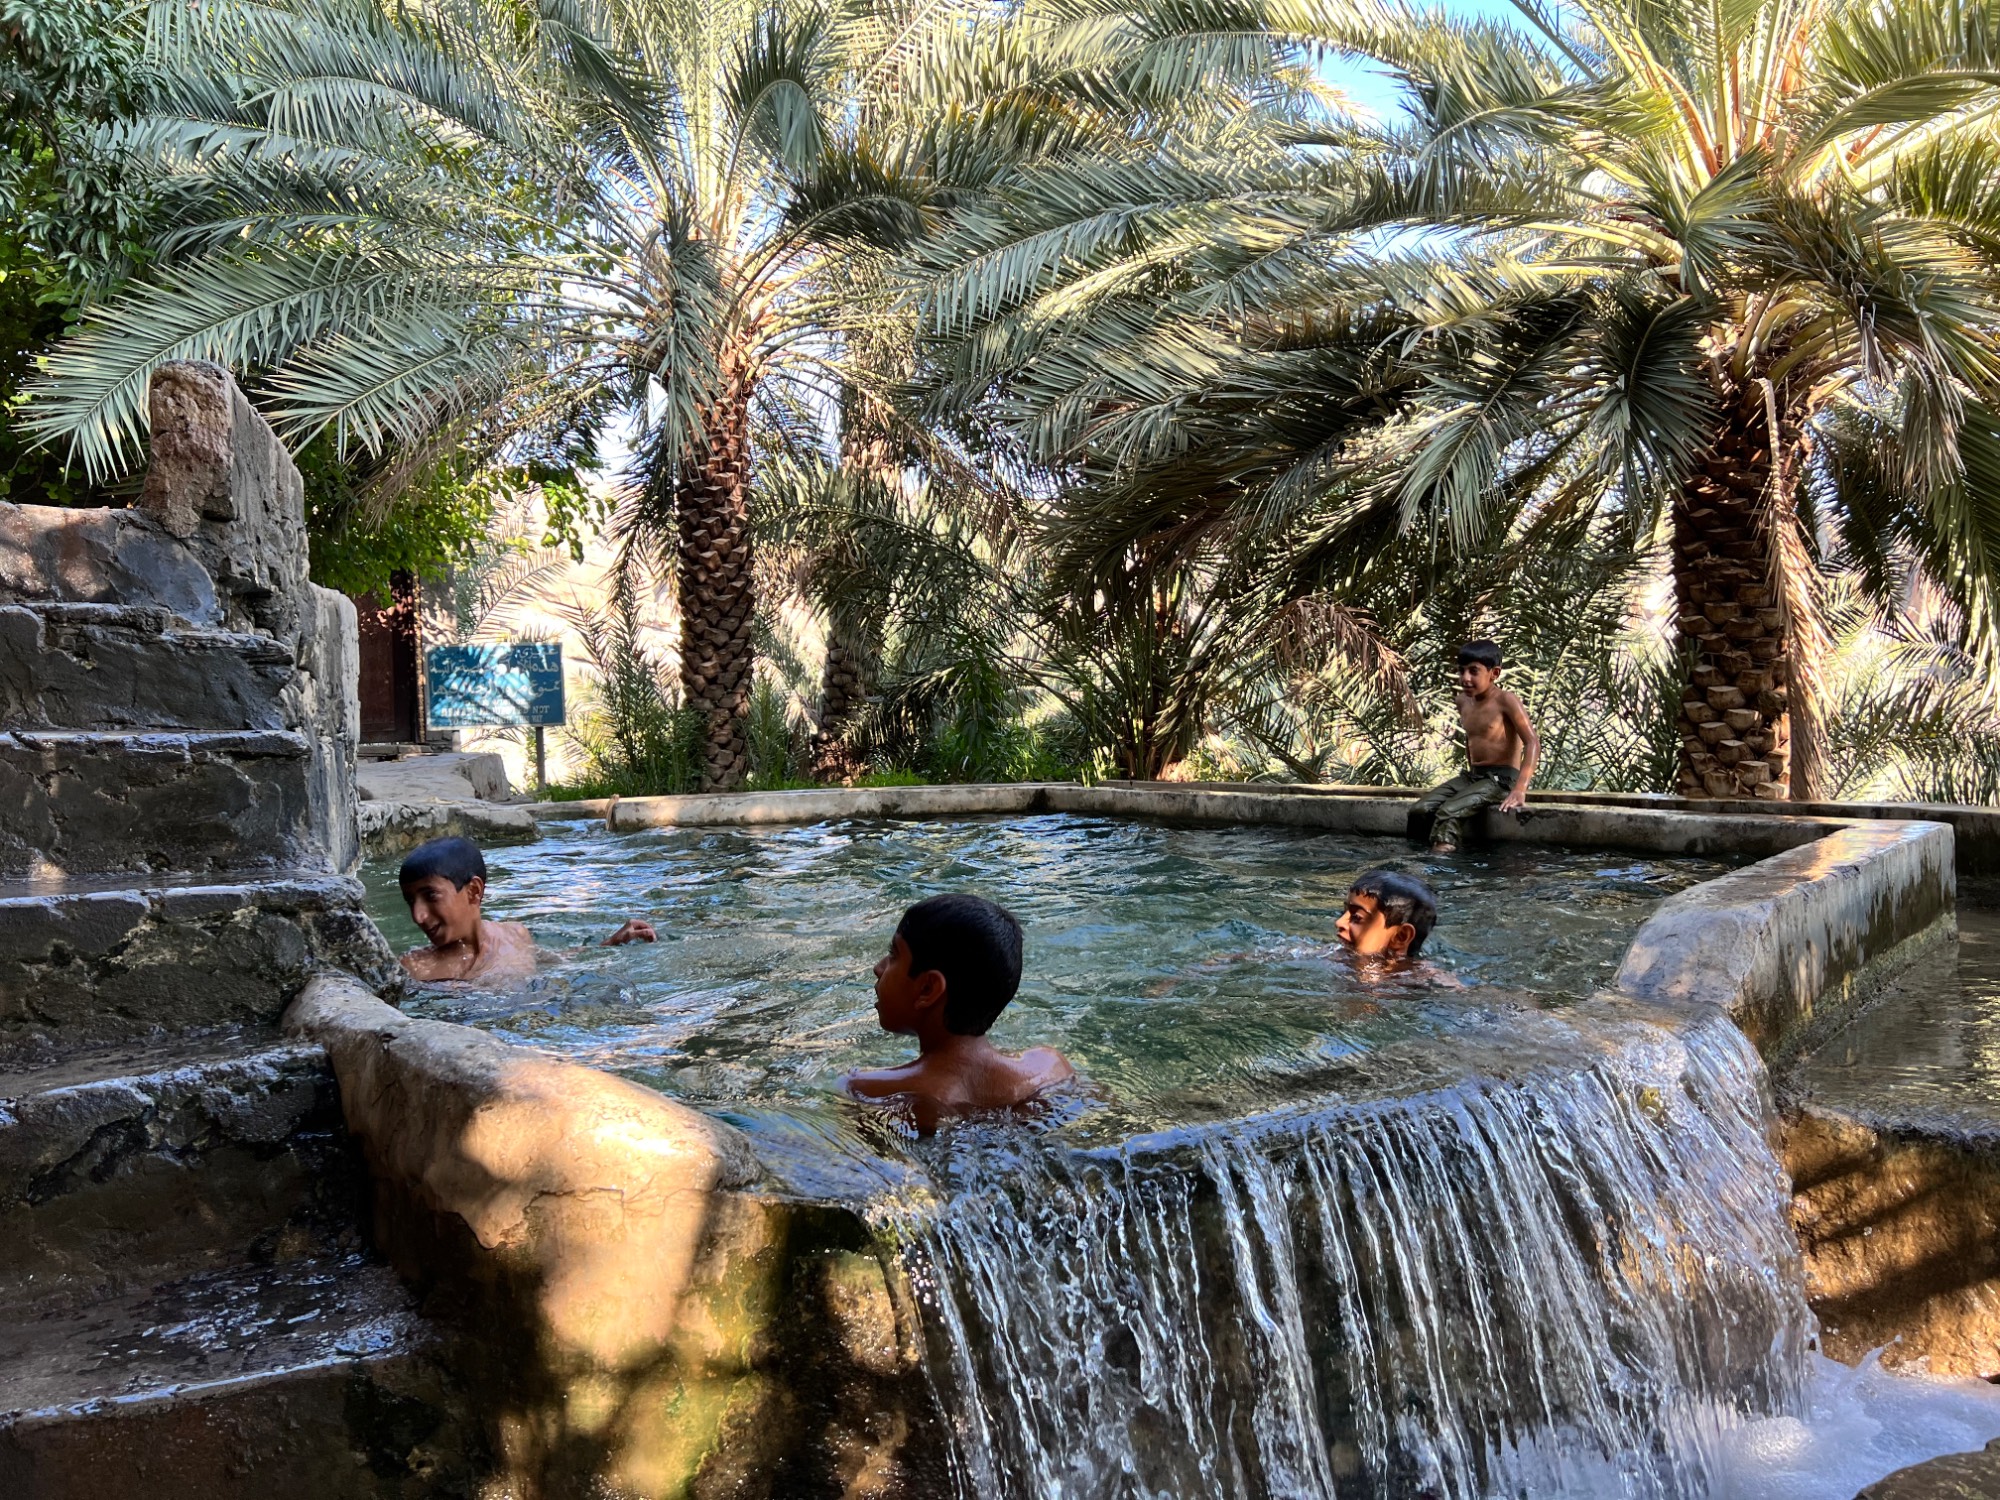 Kids swimming in an oasis